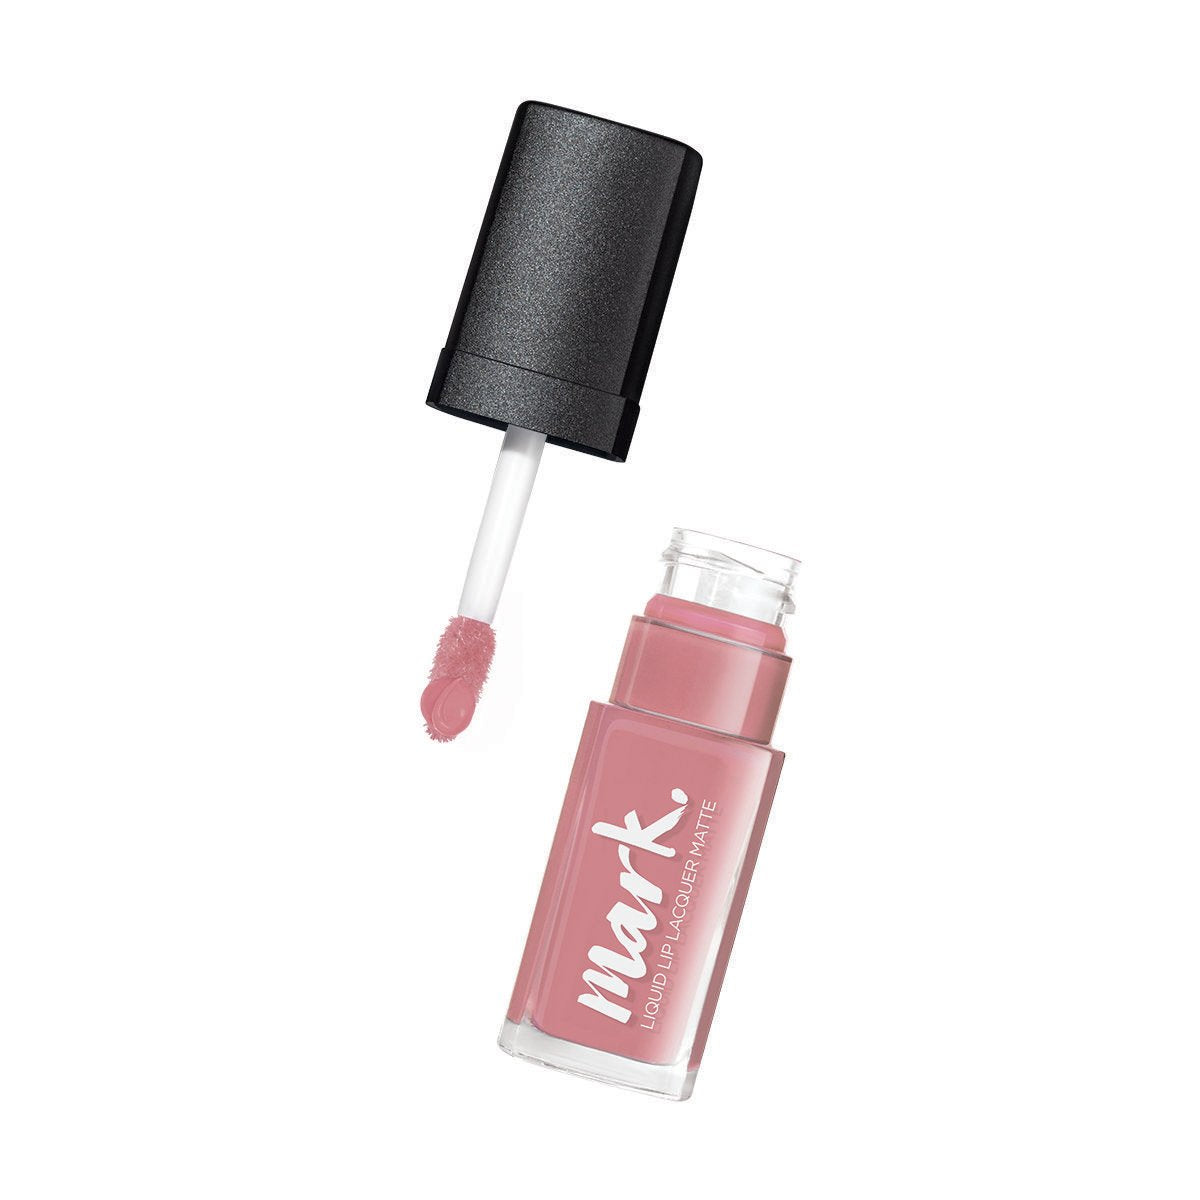 mark. Likit Mat Ruj SPF15 Pinking About You 28989 7ml